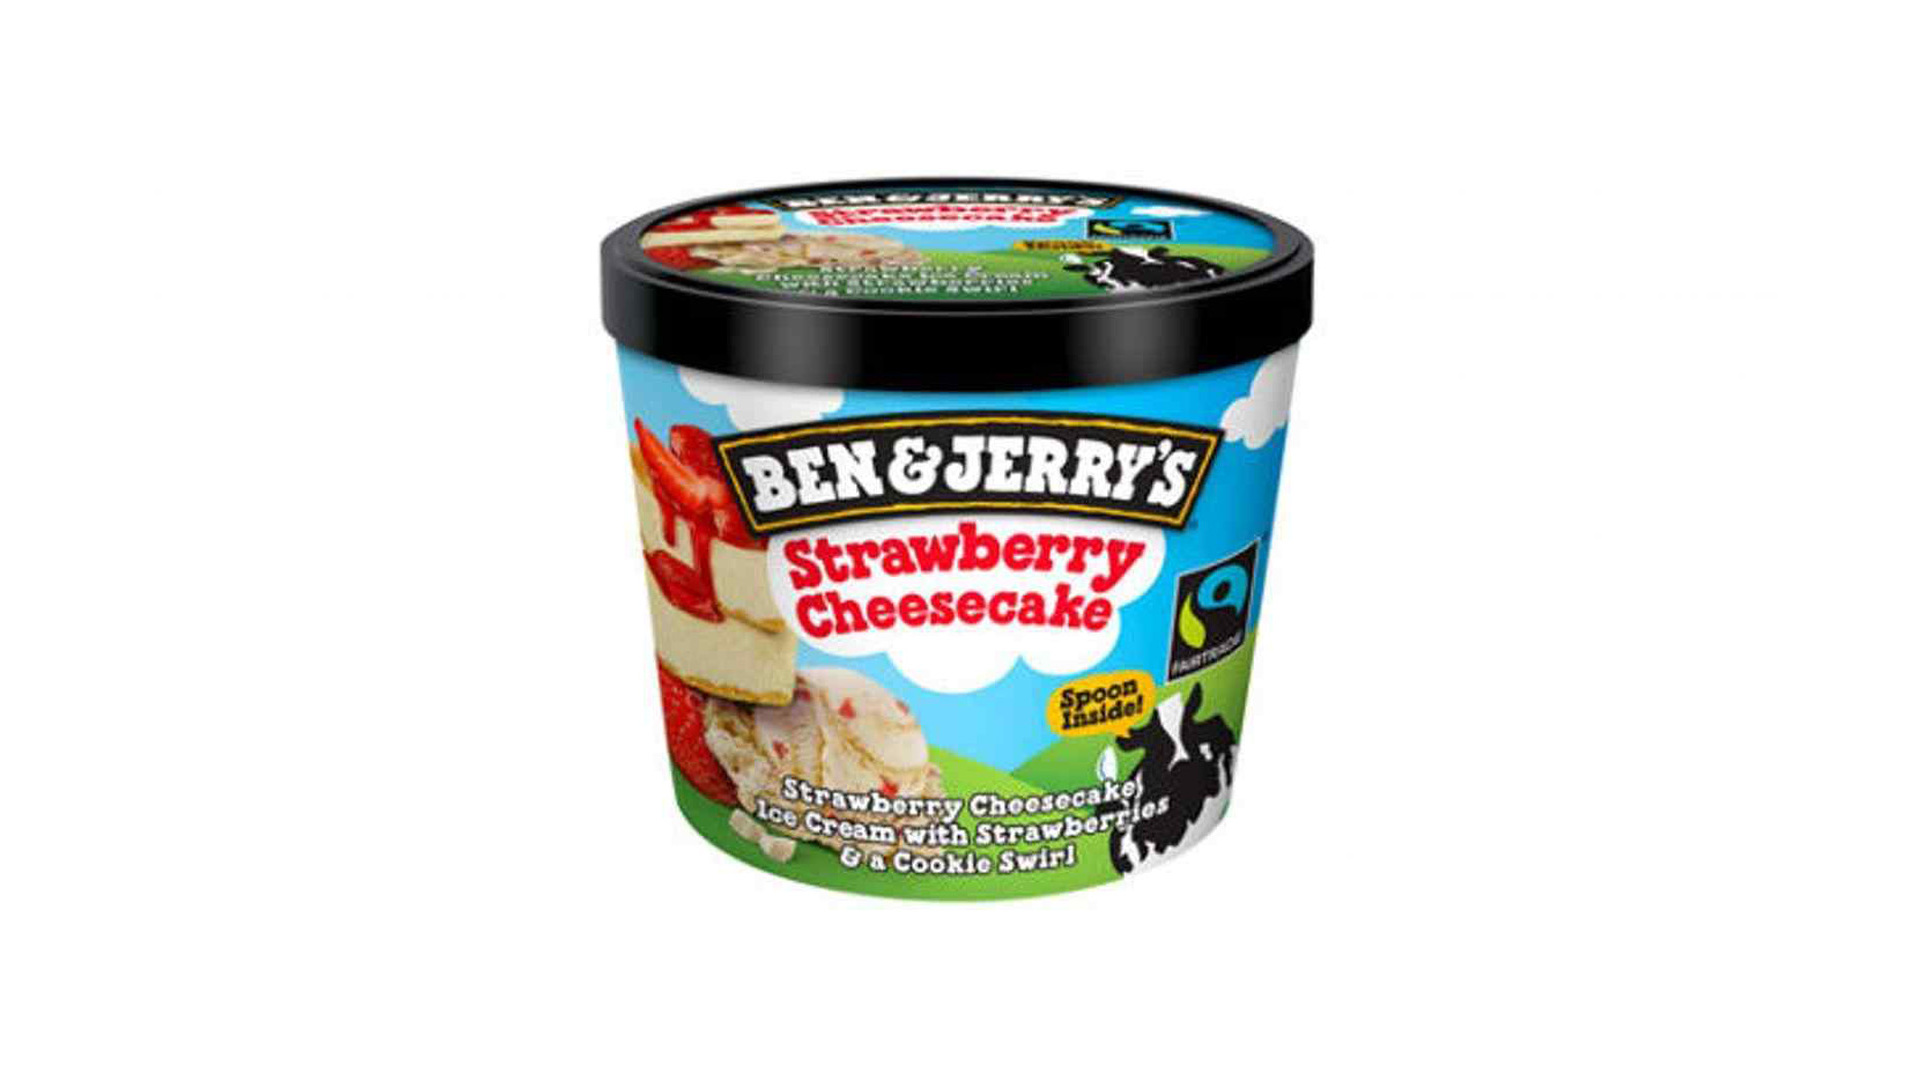 Ben & Jerry's Strawberry  Cheesecake 100ml - Wraps Delivery in Stratford Marsh E15